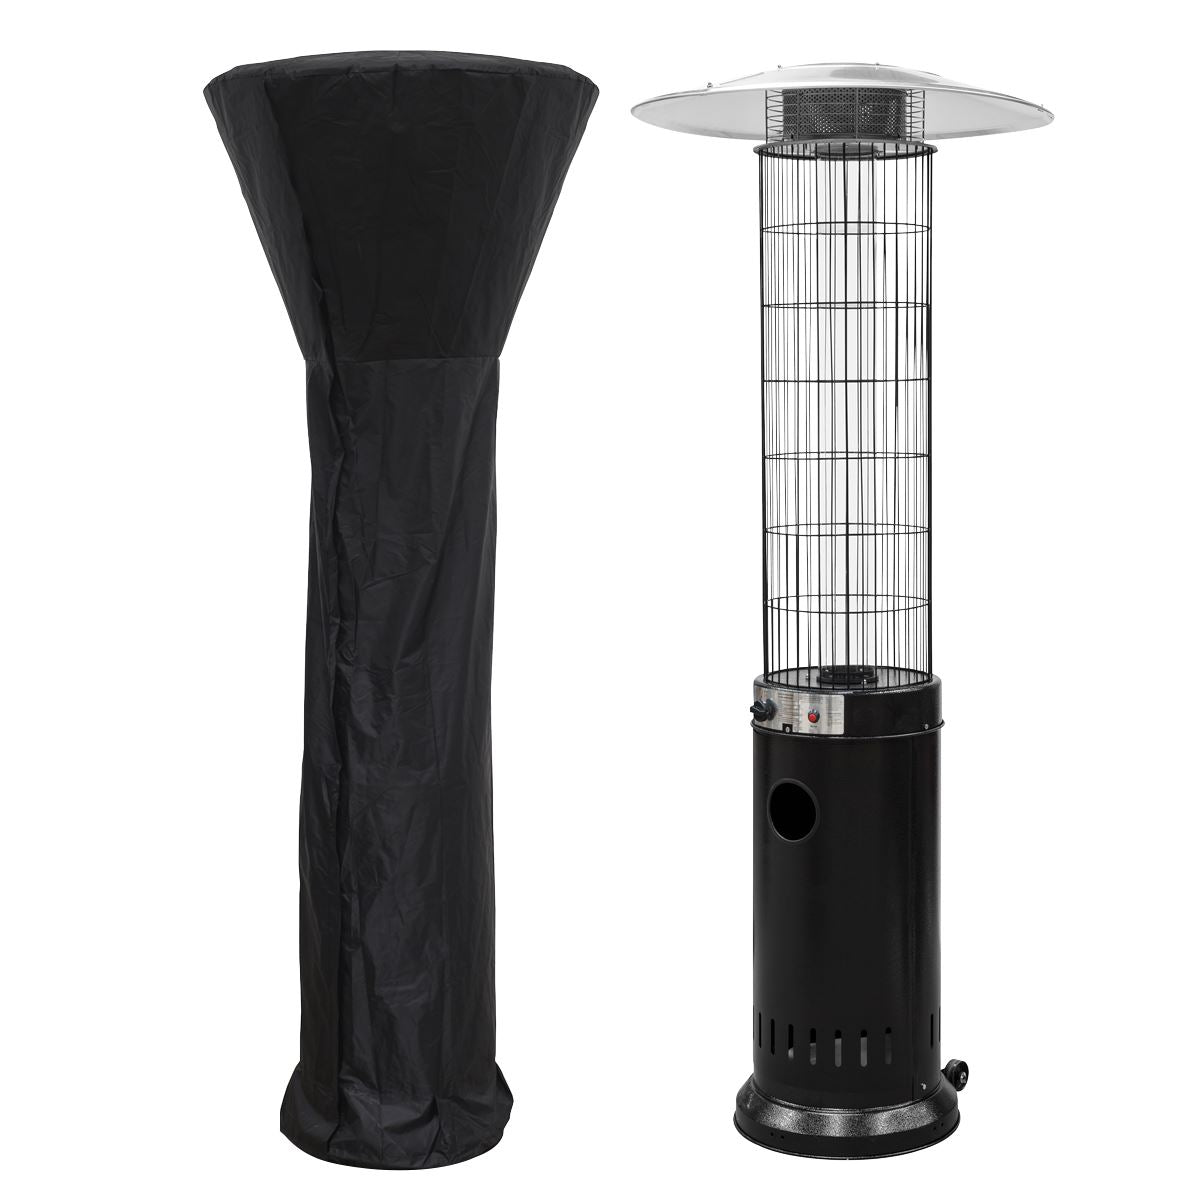 Dellonda Gas Patio Heater 13kW for Commercial & Domestic Use, Black, Supplied with Water Resistant Cover